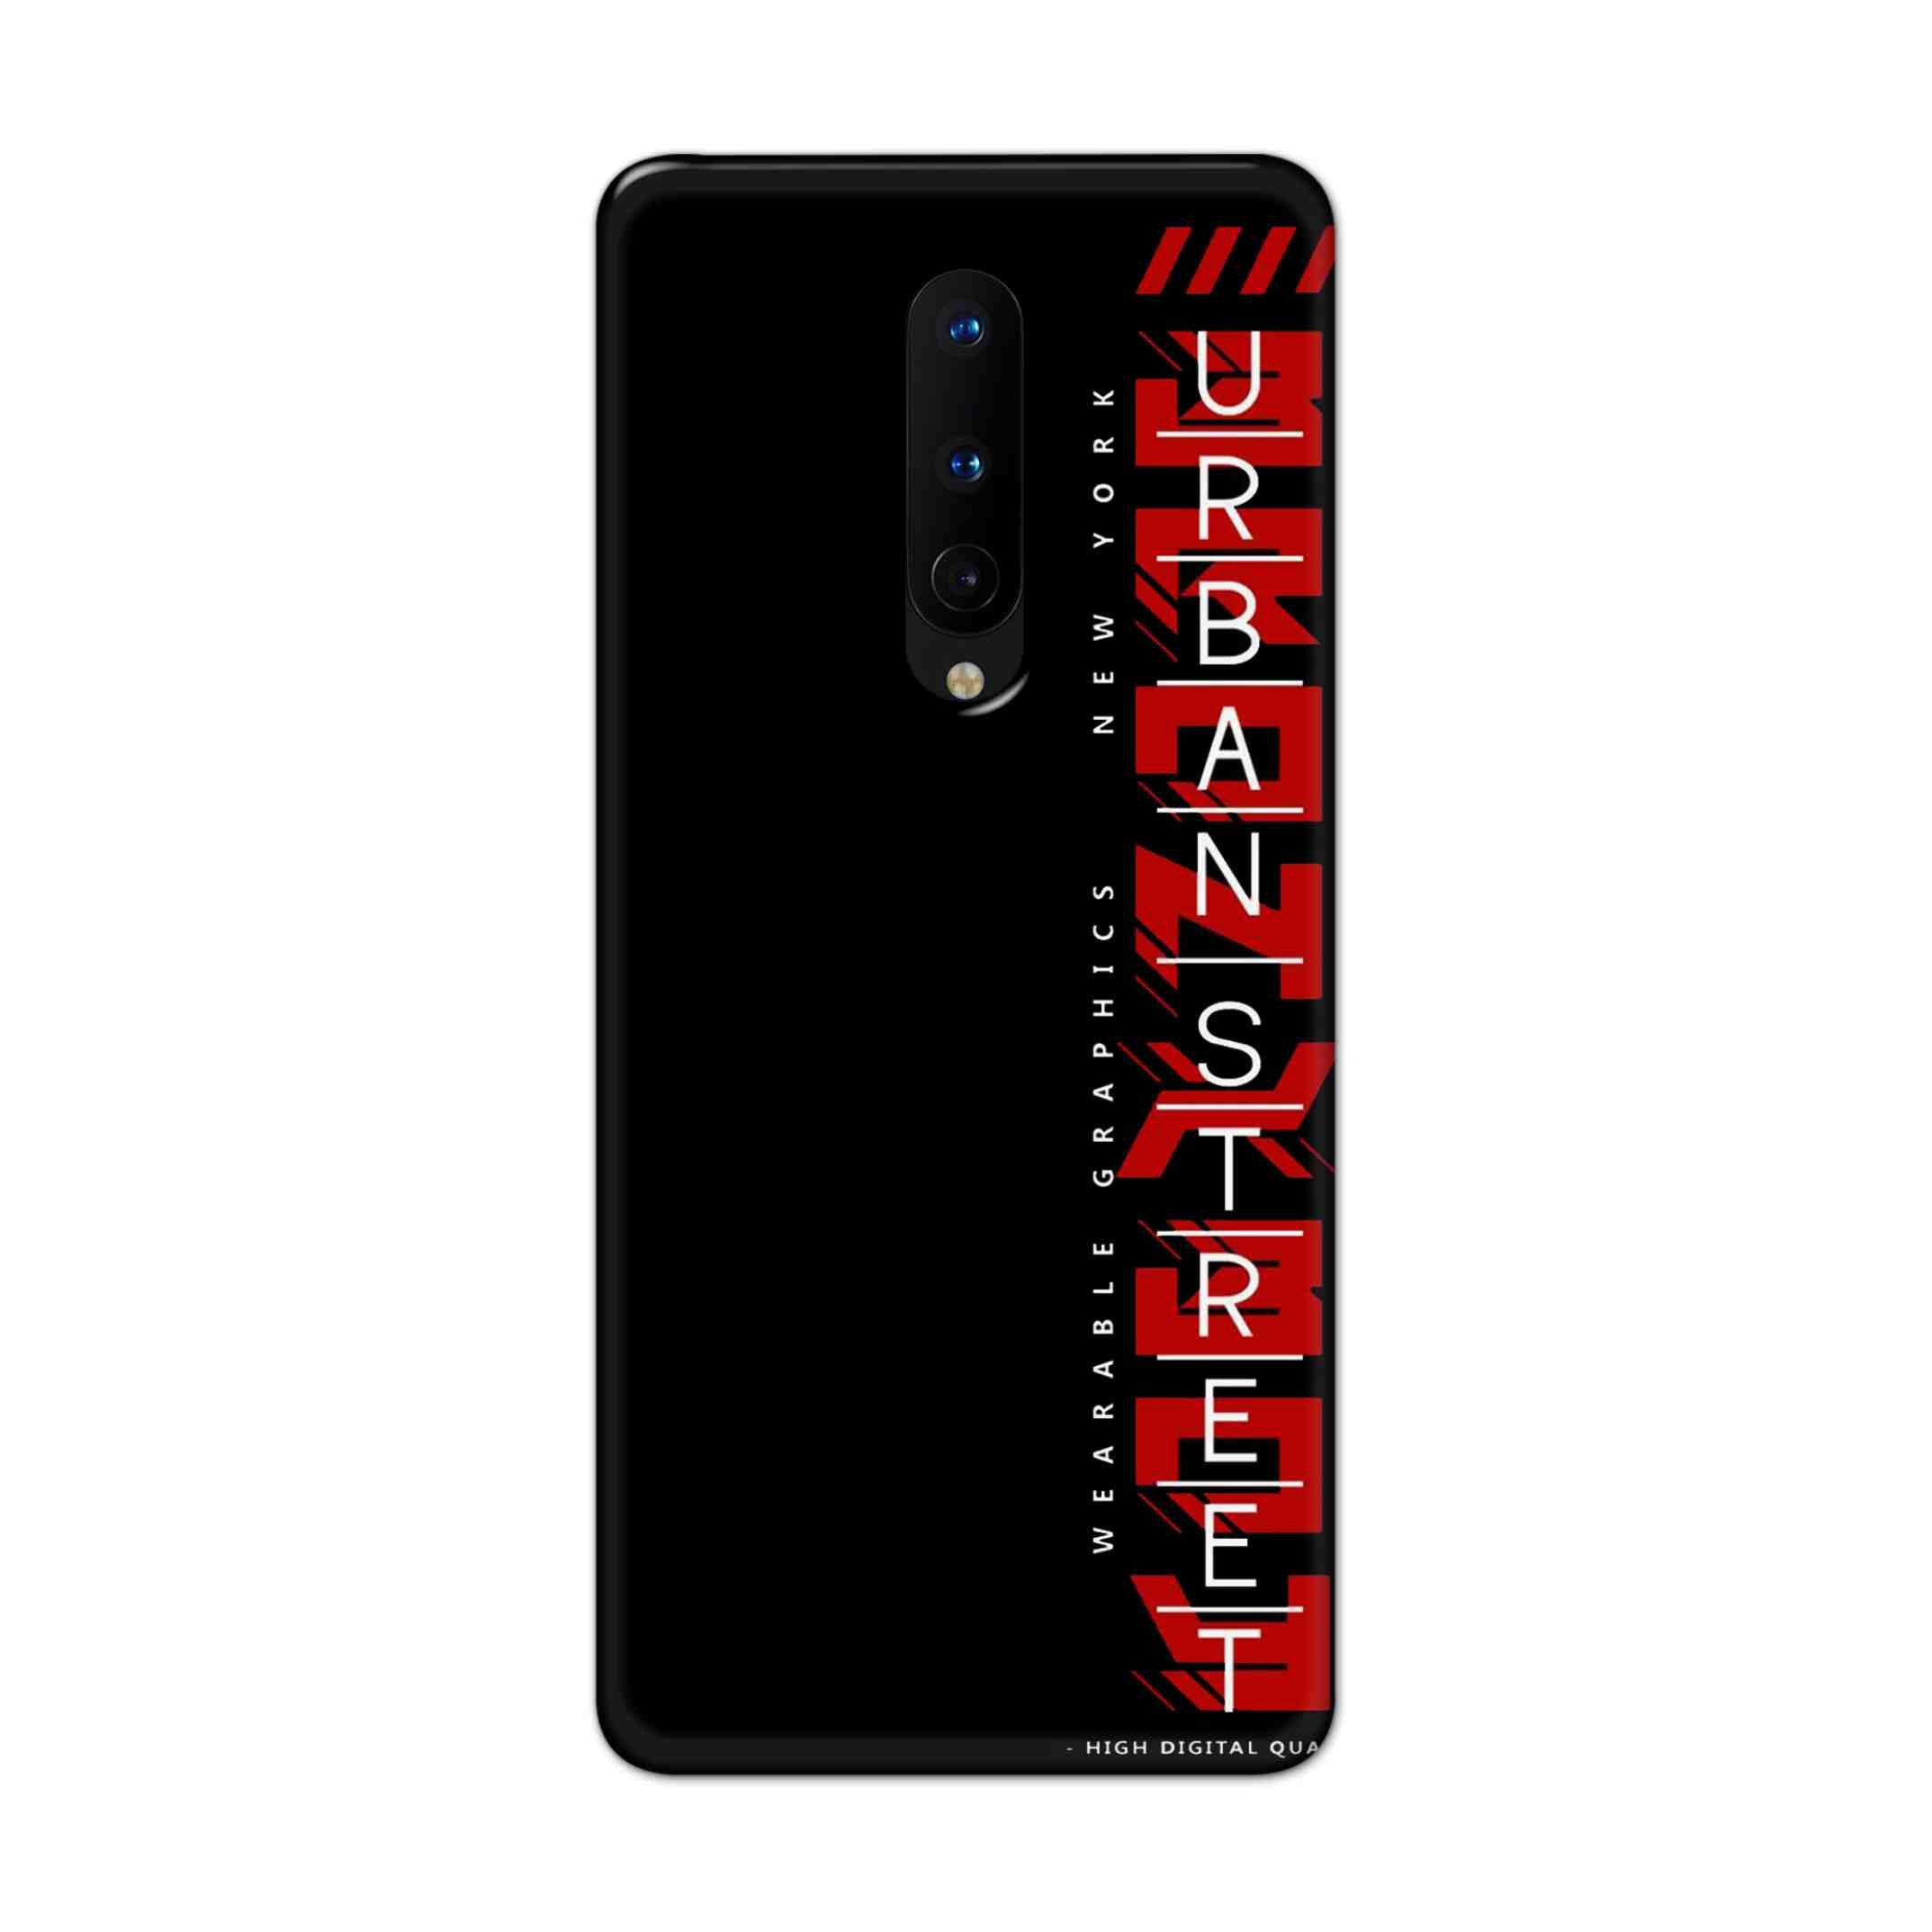 Buy Urban Street Hard Back Mobile Phone Case Cover For OnePlus 8 Online